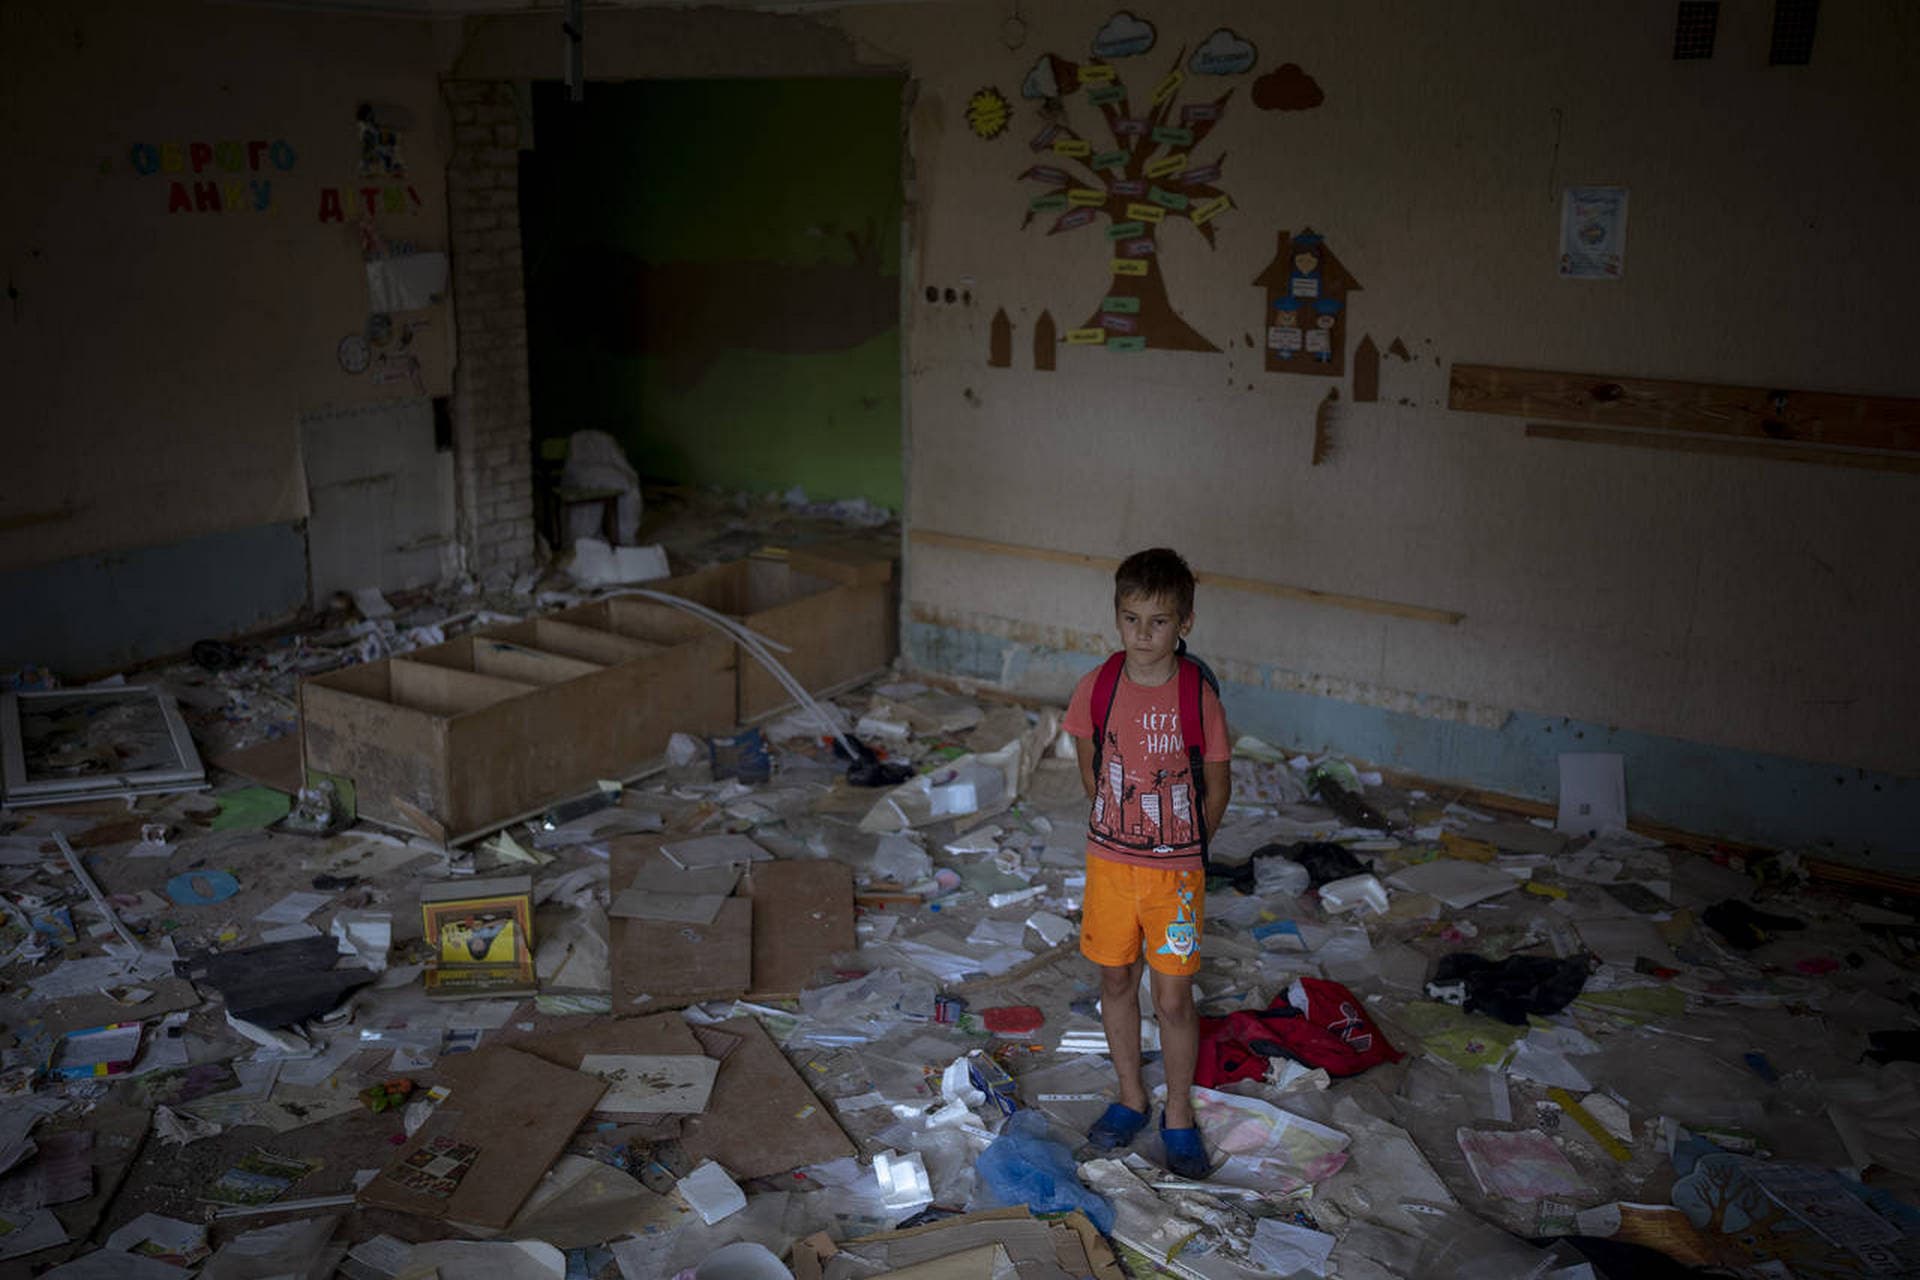 Ivan Hubenko stands in the remains of his classroom in the Chernihiv School #21, which was bombed by Russian forces on March 3, in Chernihiv